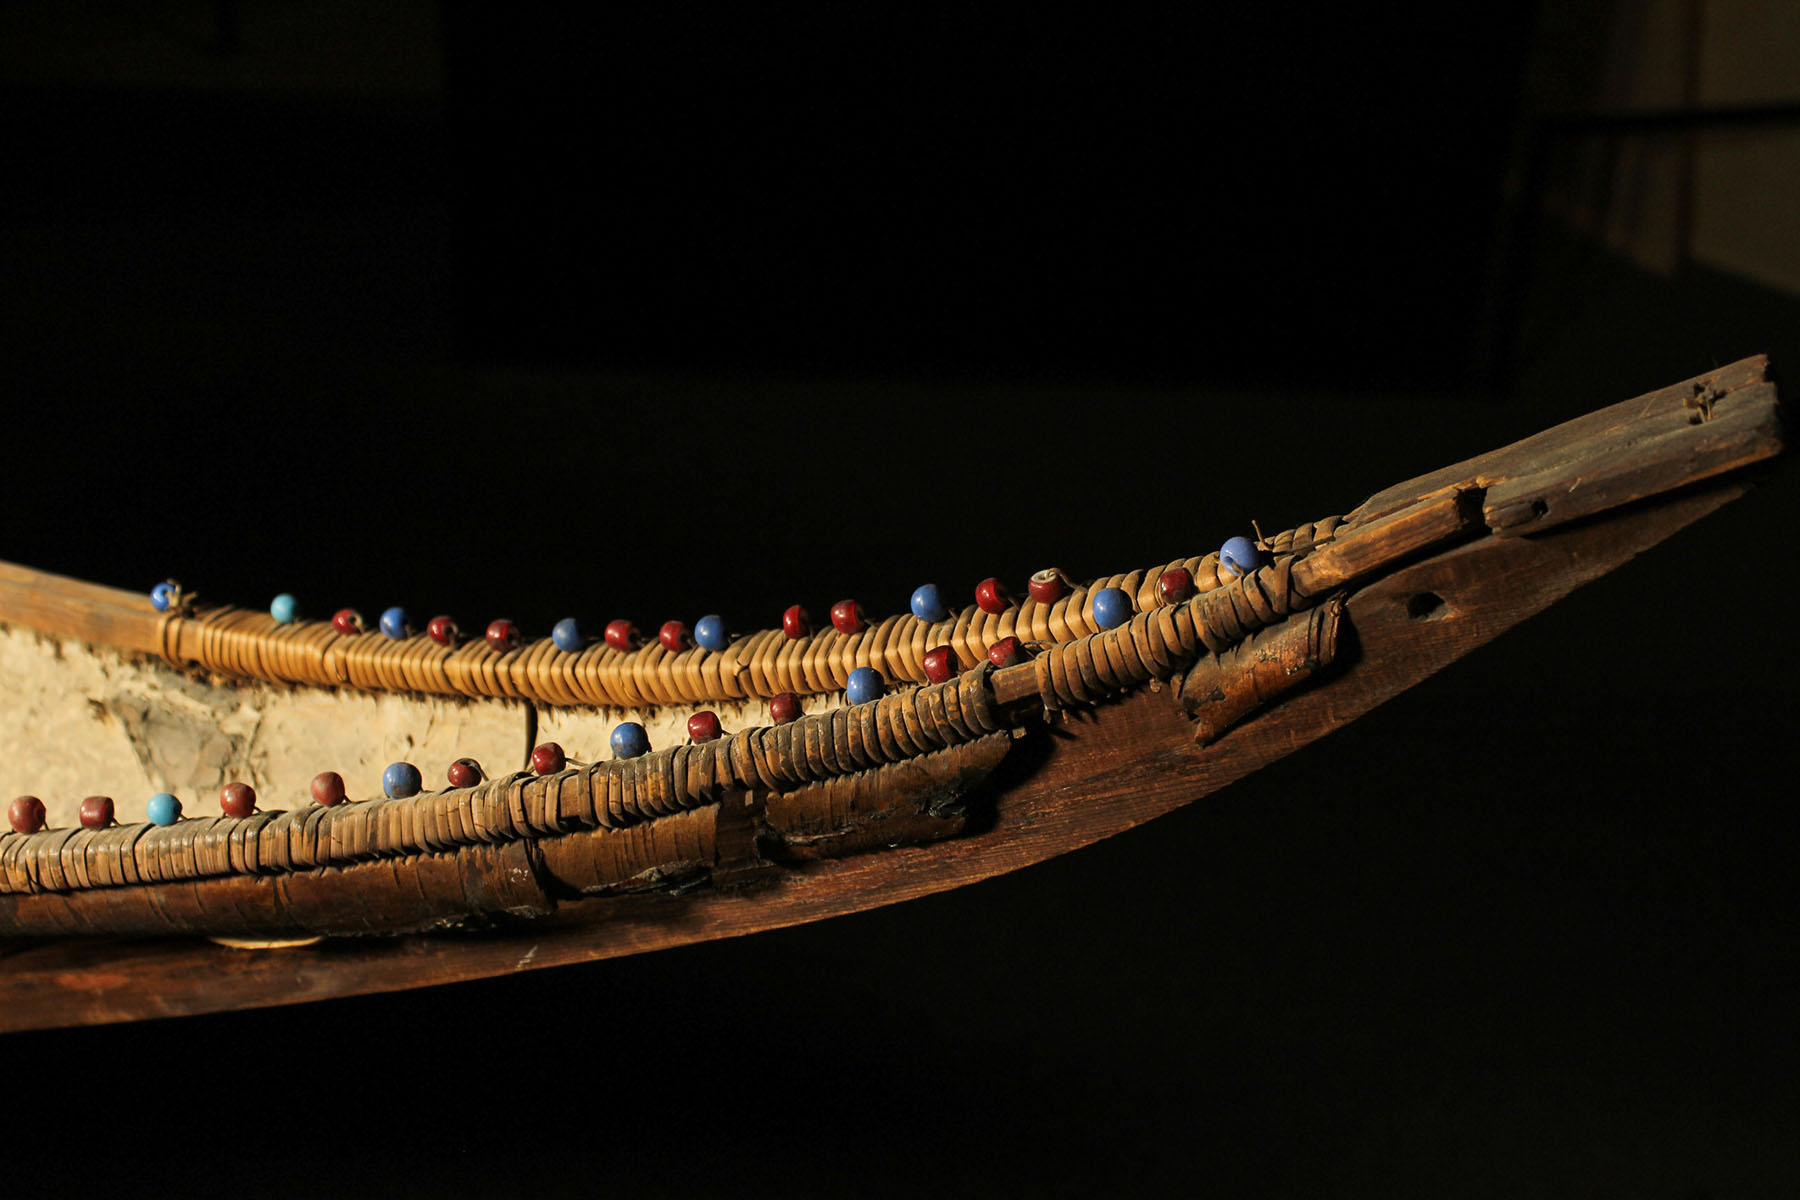 Trade bead, ornamented canoe from the traditional territory of the Tr’ondëk Hwëch’in First Nation (Yukon River).